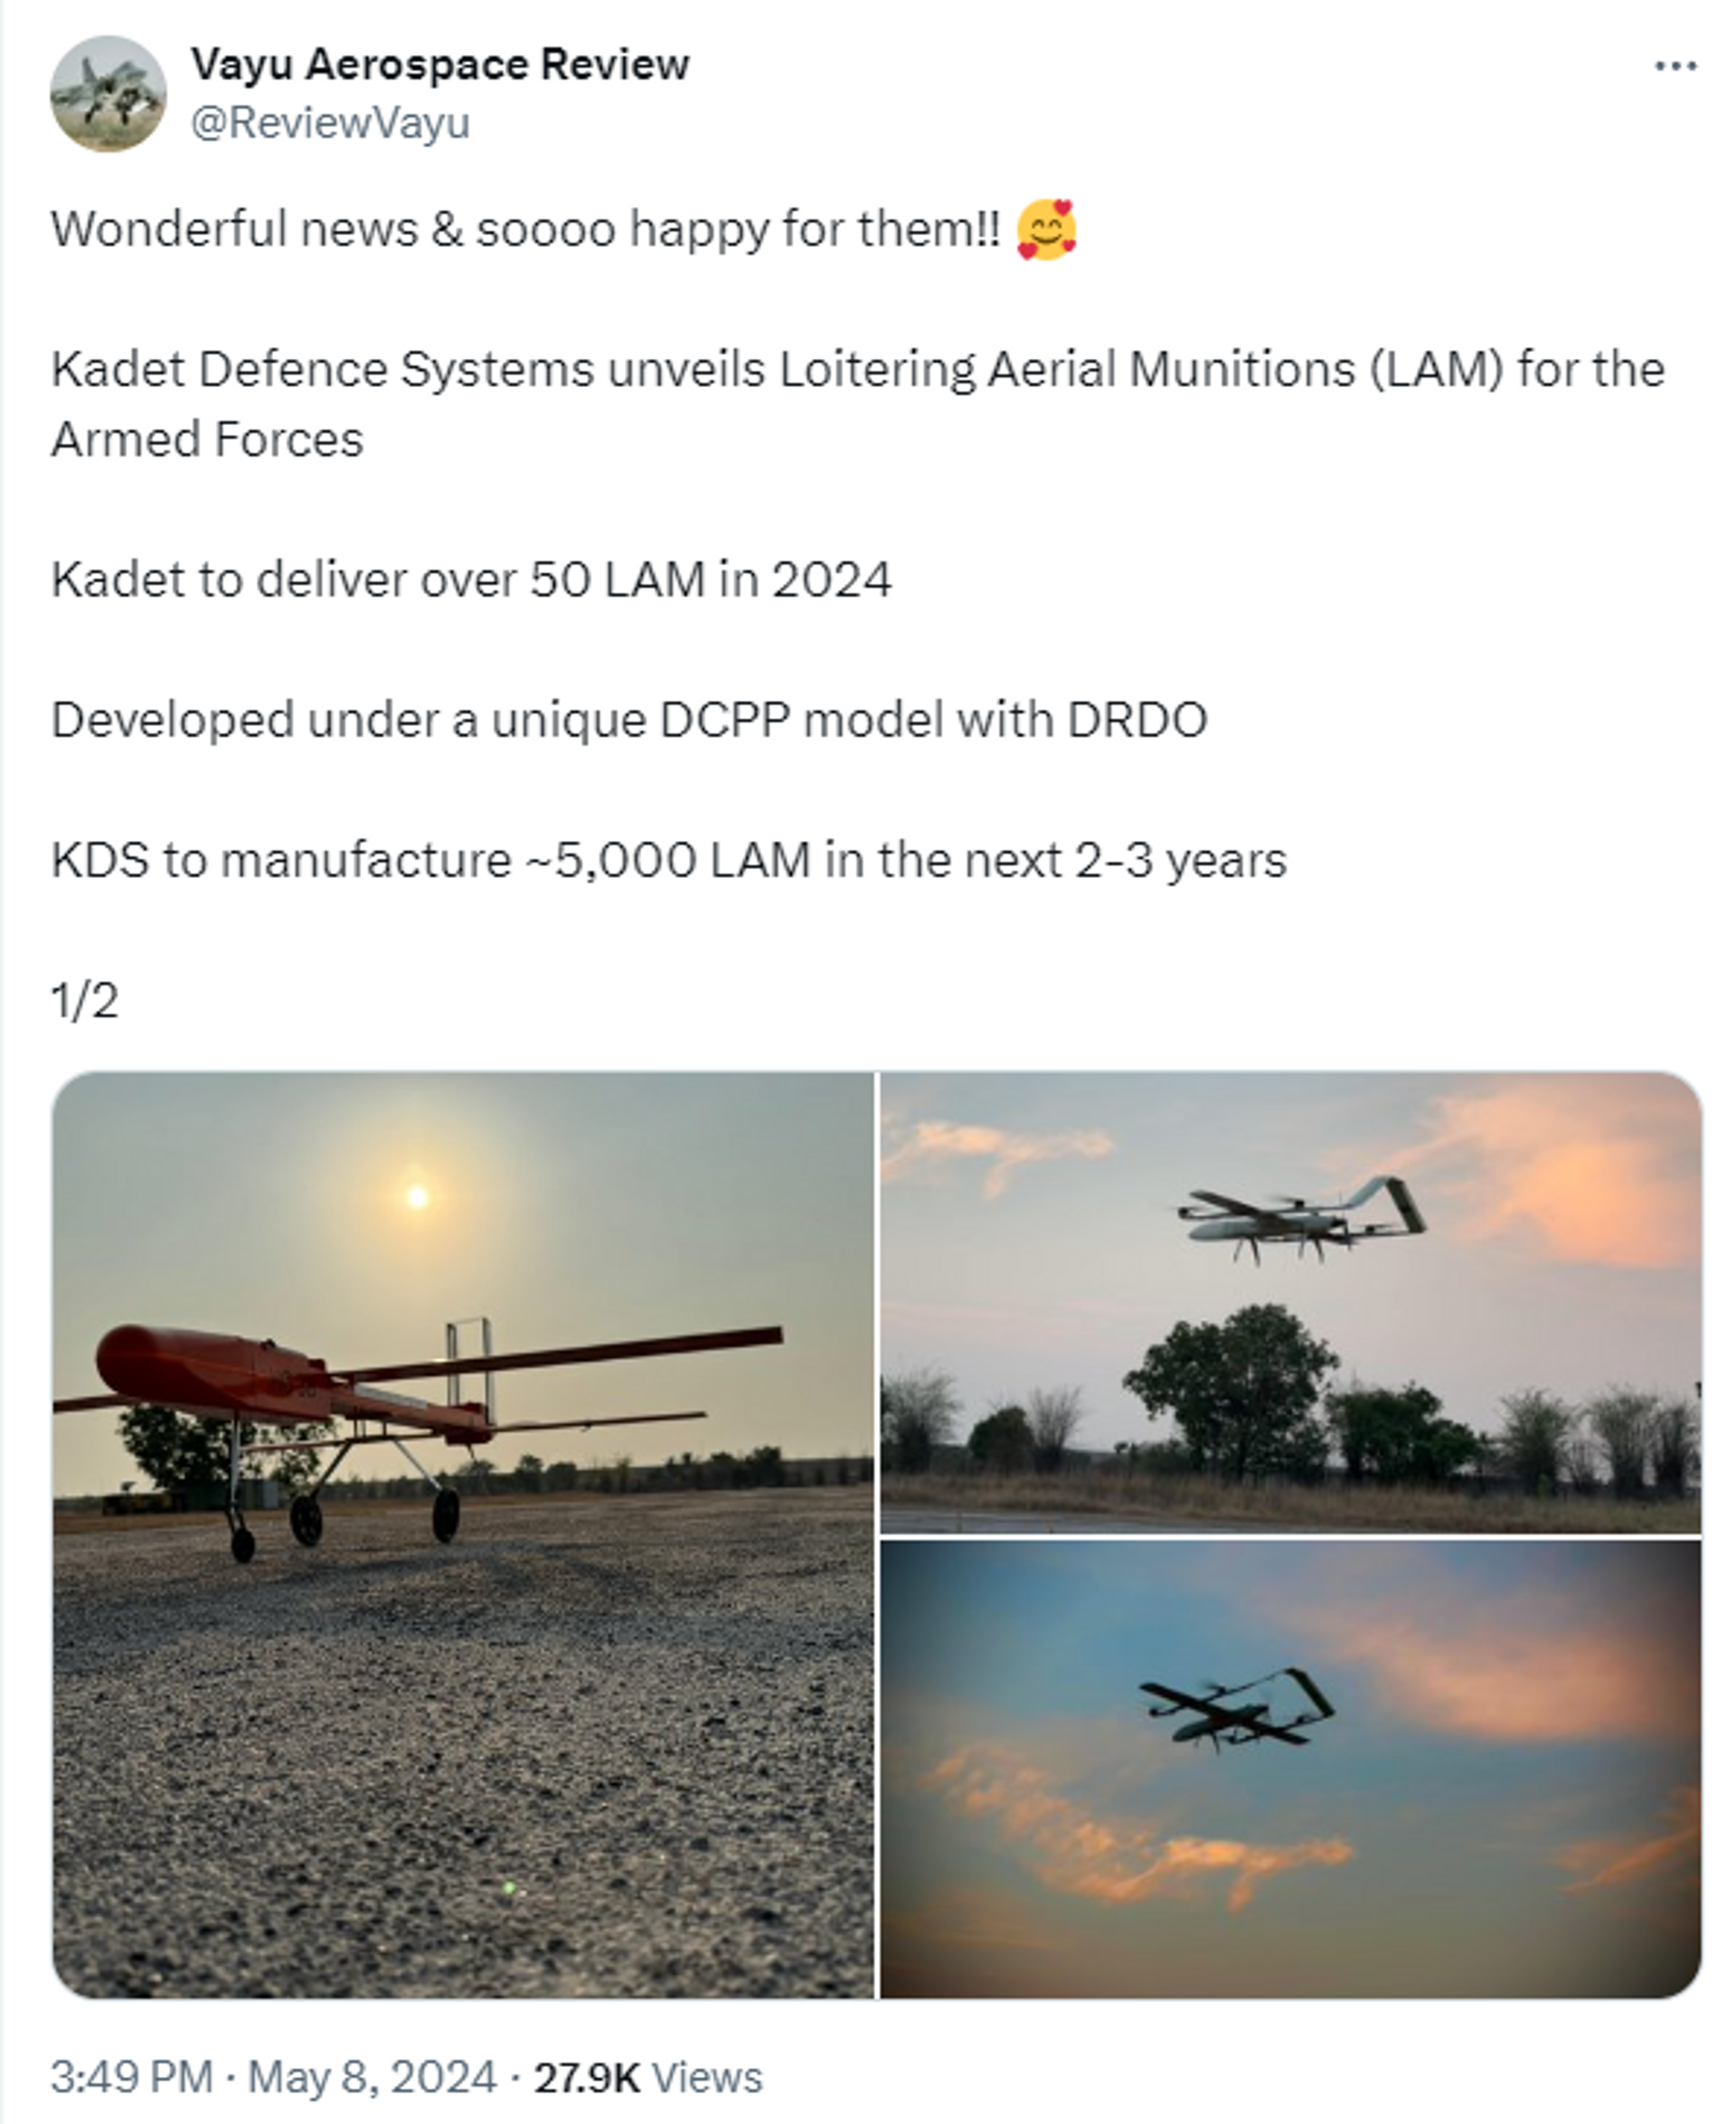 Kadet Defence Systems Indigenously Developed India’s First Suicide Drone 'LAM' - Sputnik India, 1920, 09.05.2024